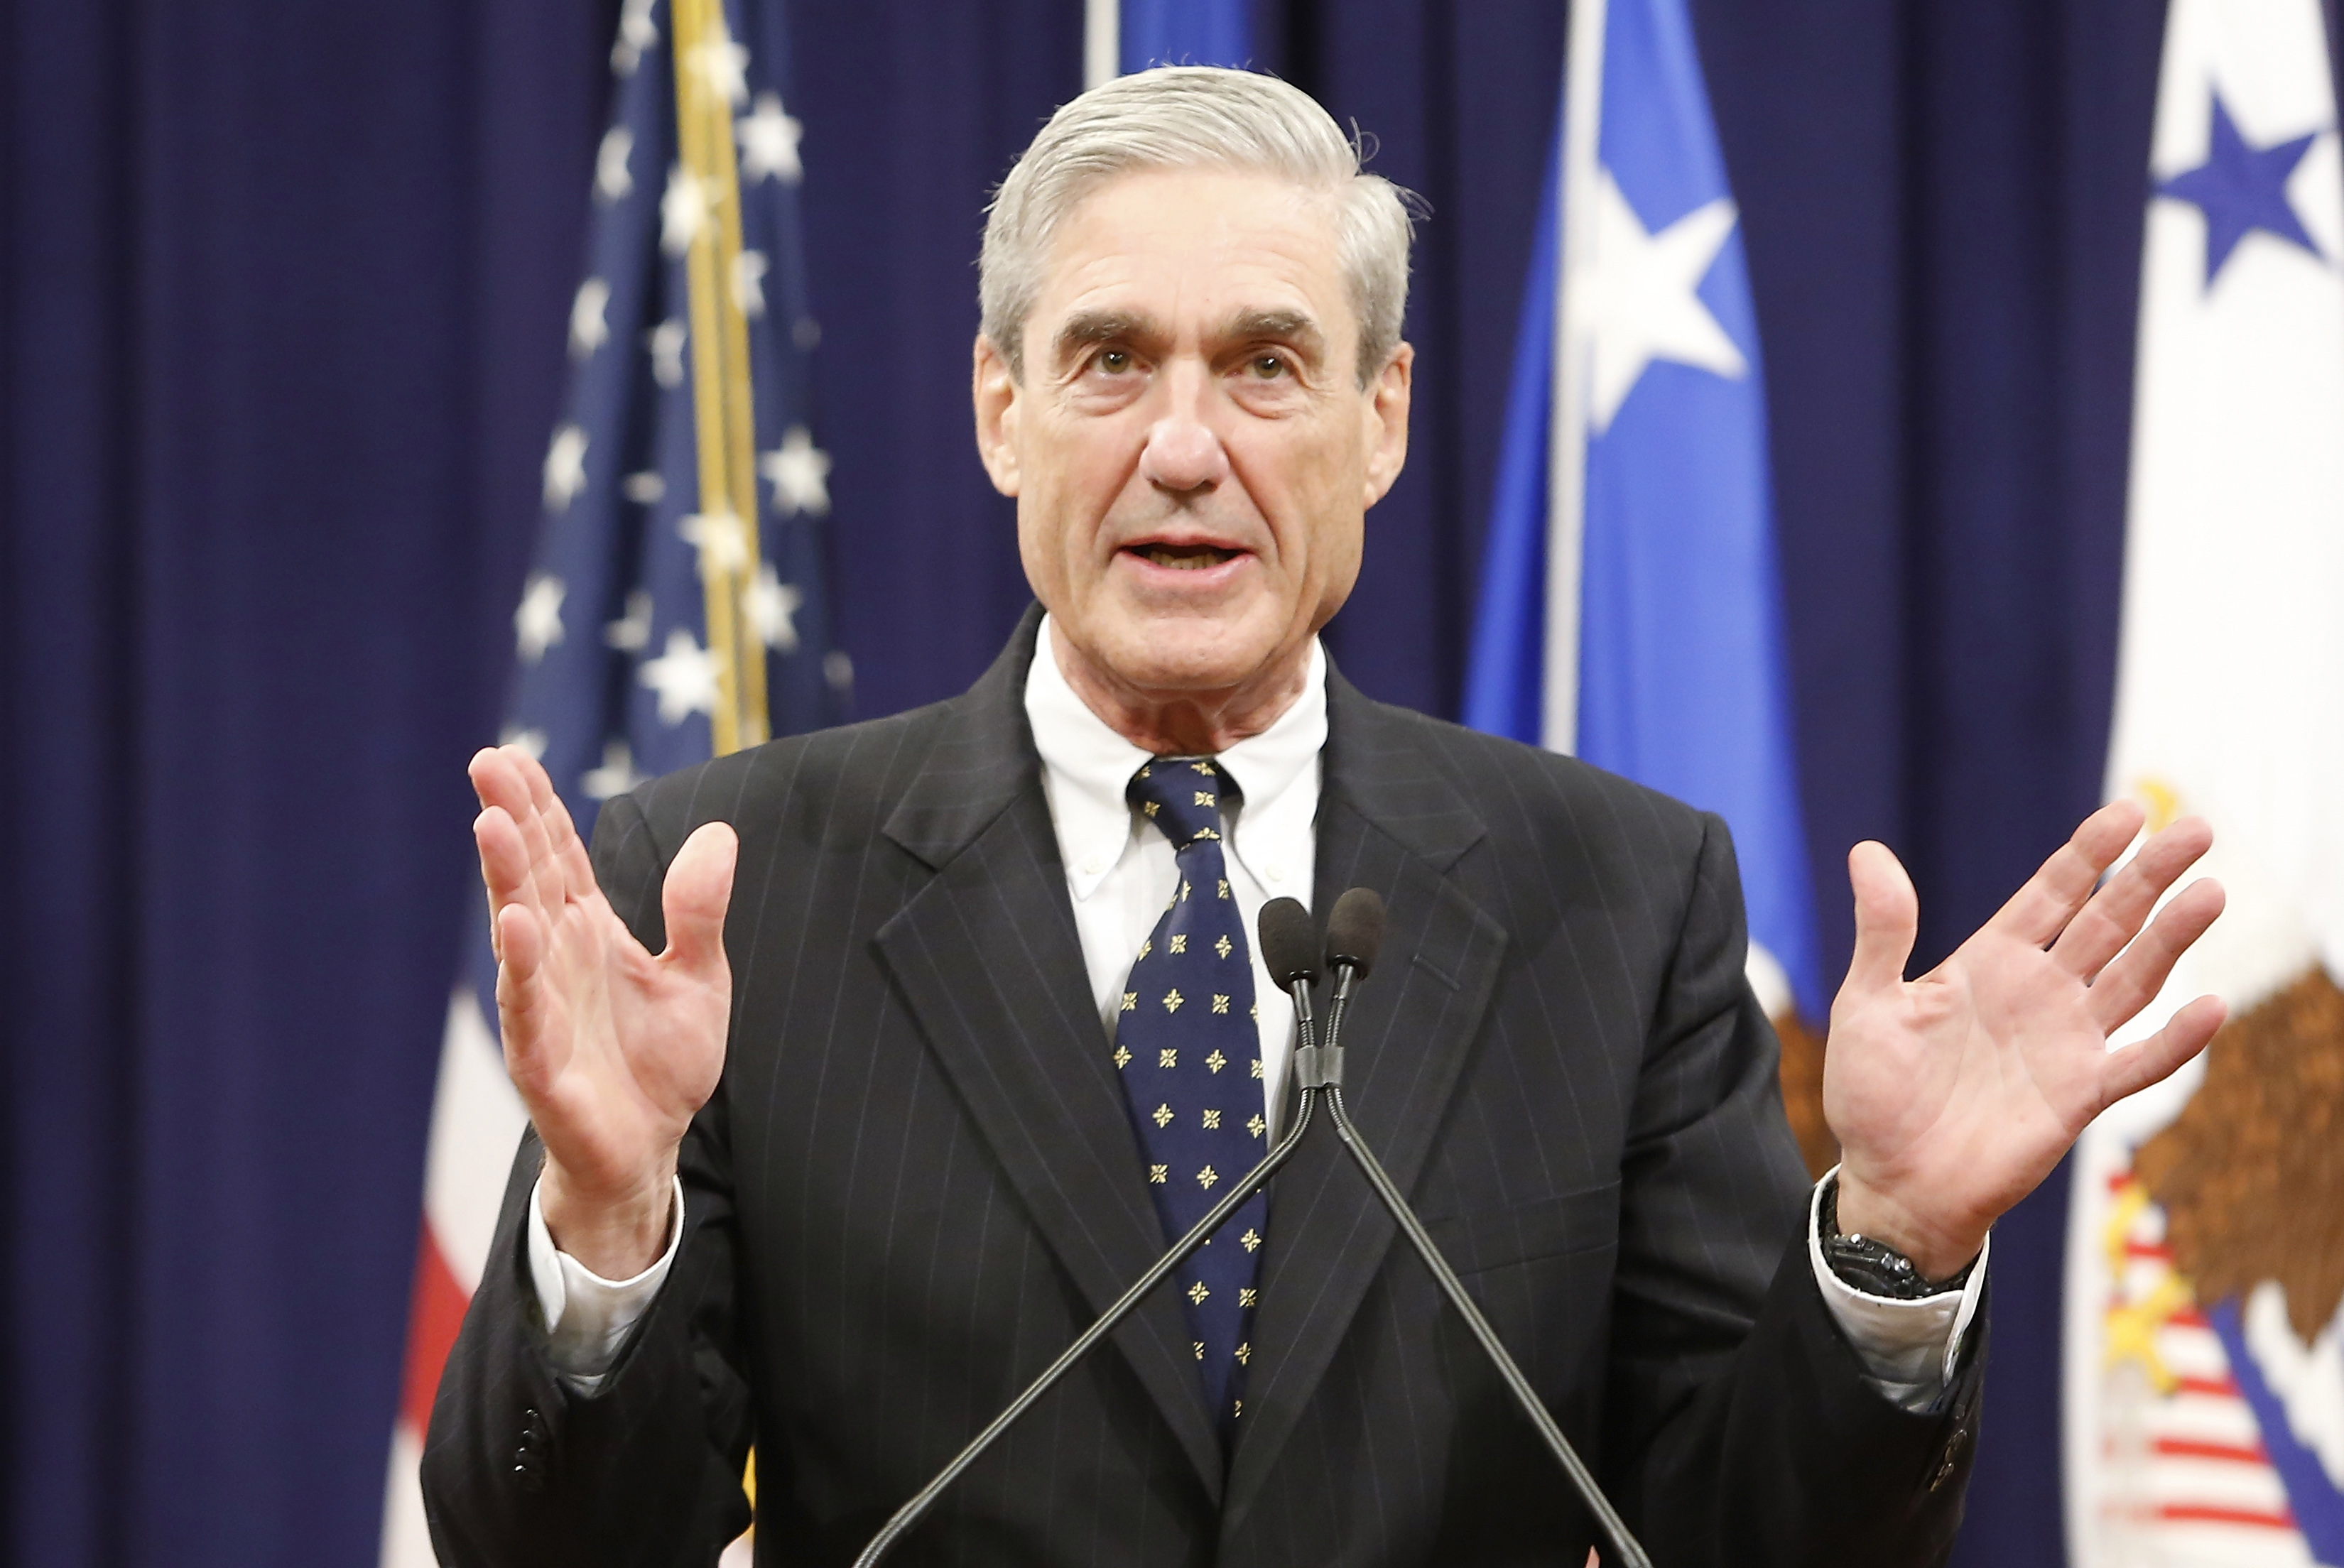 Robert Mueller reacts to applause from the audience during his farewell ceremony at the Justice Department in Washington, August 1, 2013. REUTERS/Jonathan Ernst